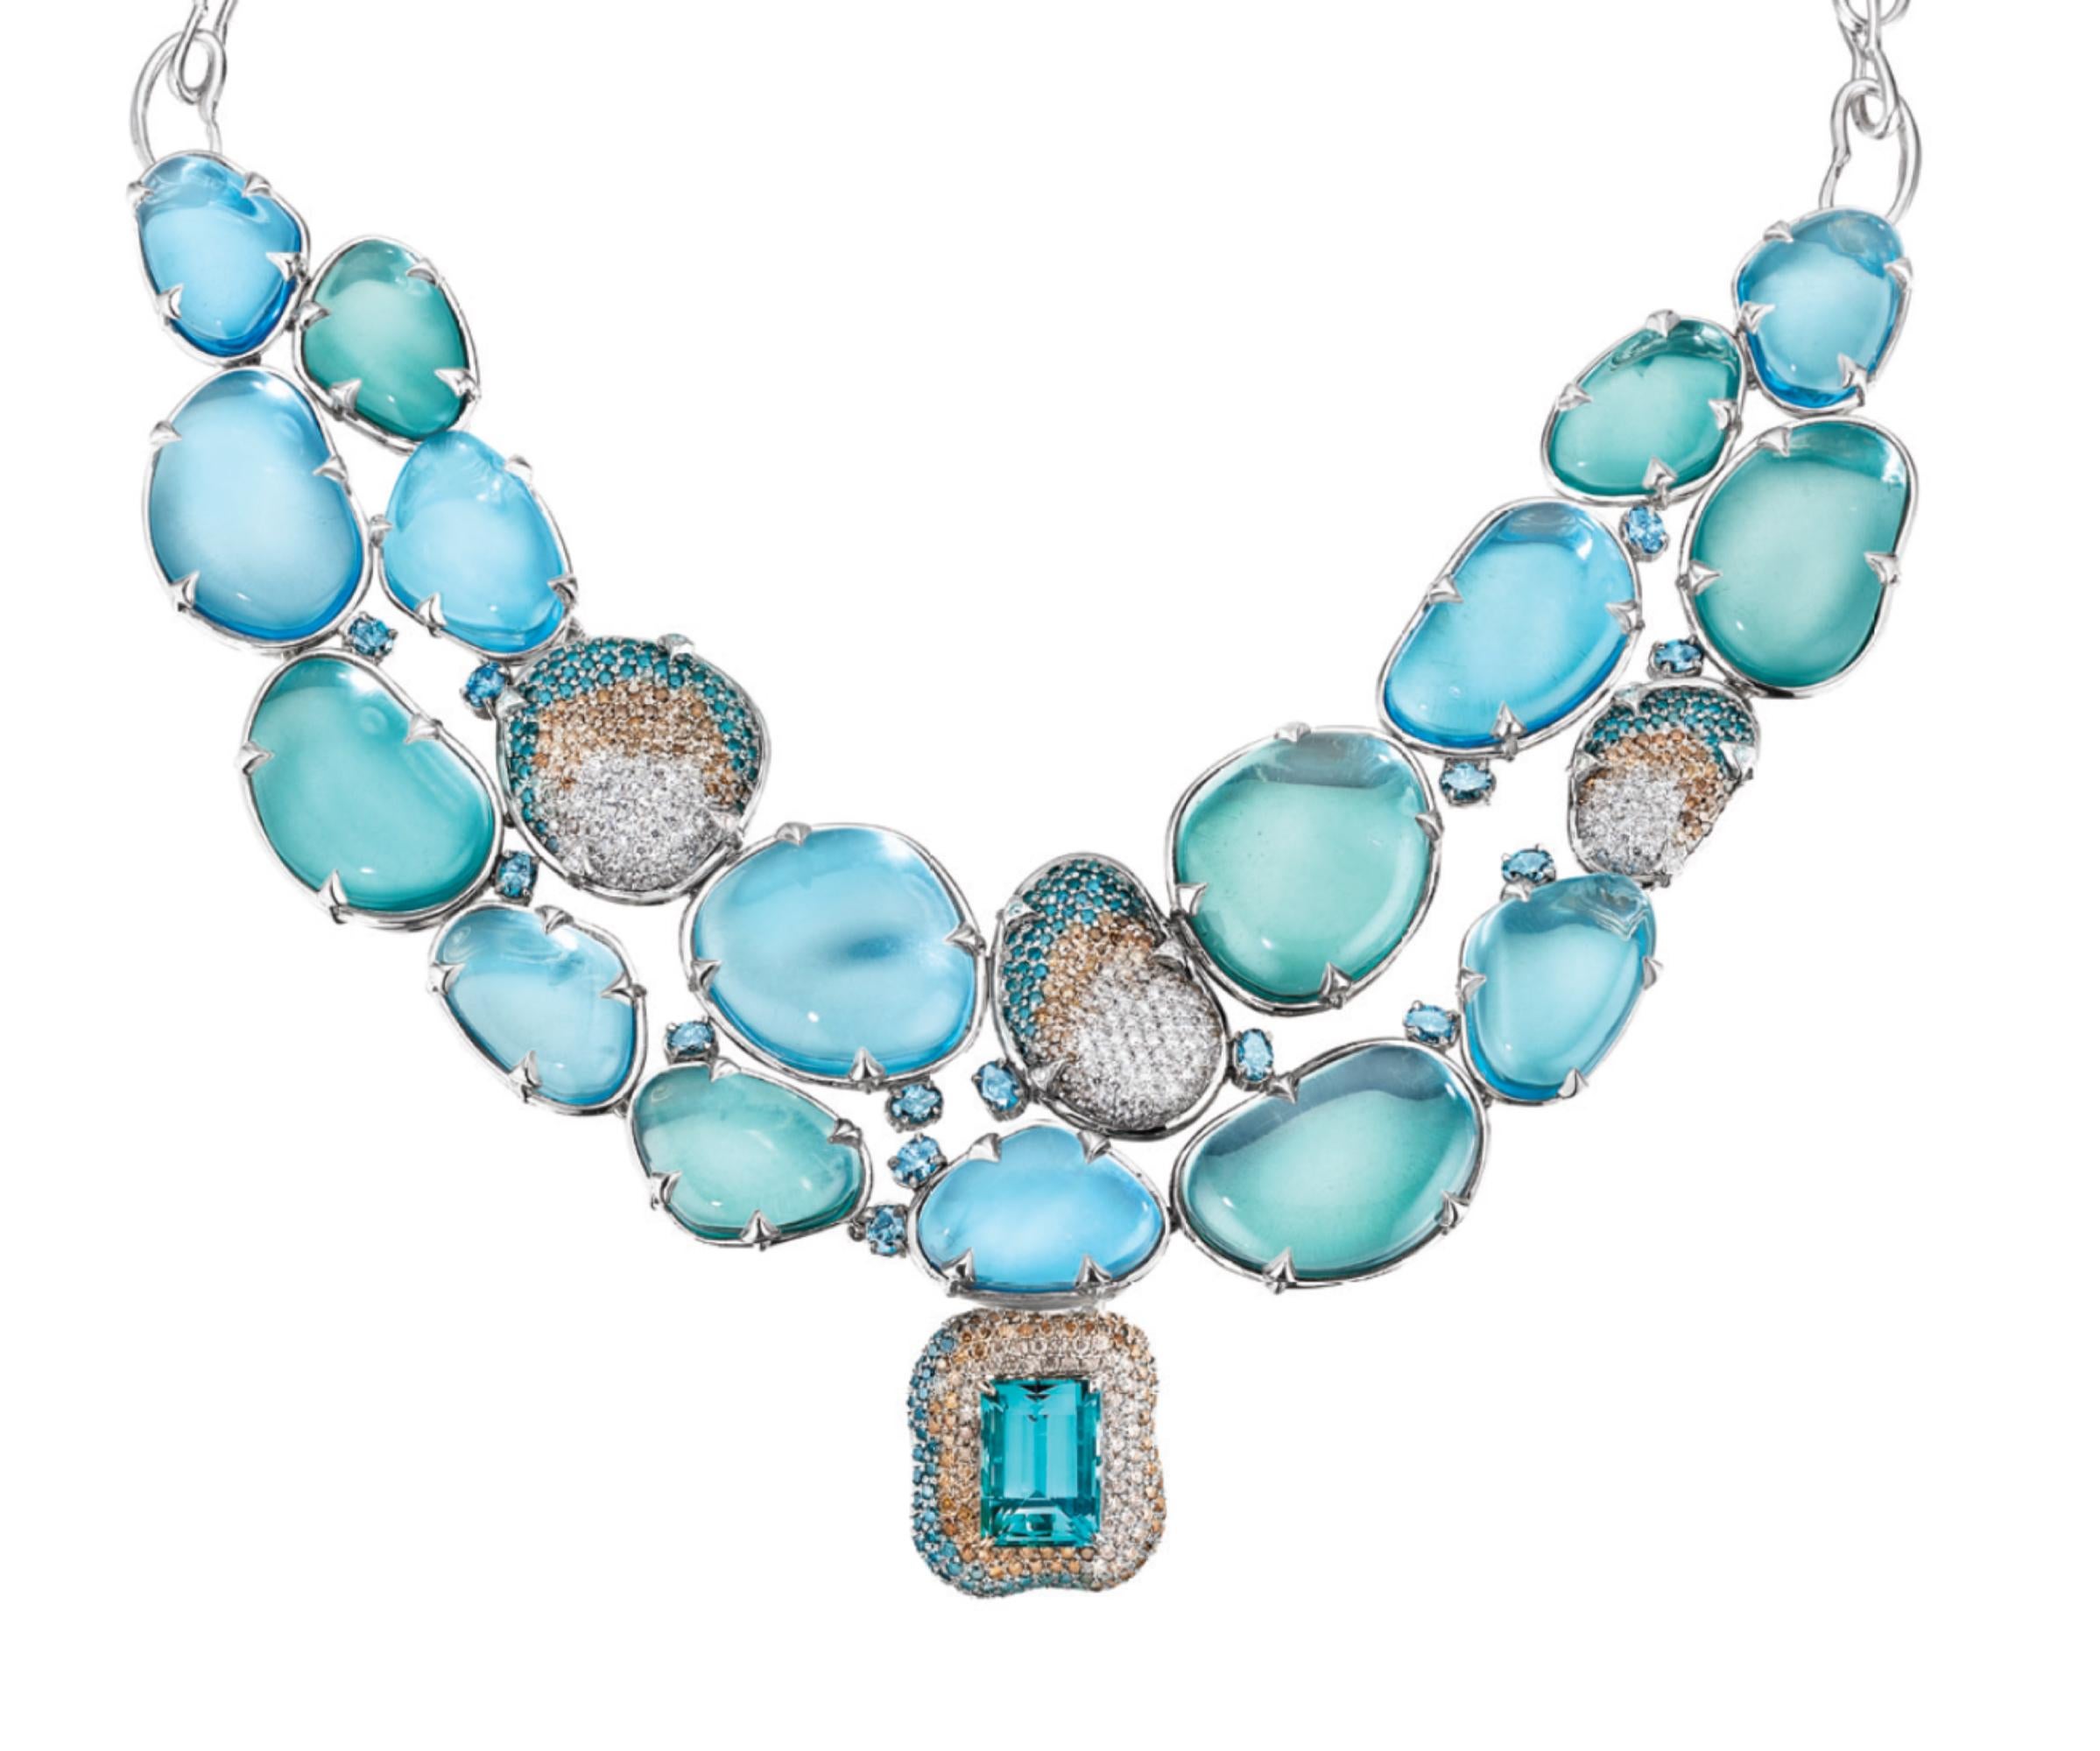 Specs: 18k white gold necklace with 155 carats of Blue Topaz, 72 carats Green Amethyst, 4.21 carats Teal Blue Diamond, 2.07 carats White Diamond, .81 carats Brown Diamond, and 1.09 carats Cognac Diamond. 

Story: “Highest of the Gods, lord of the